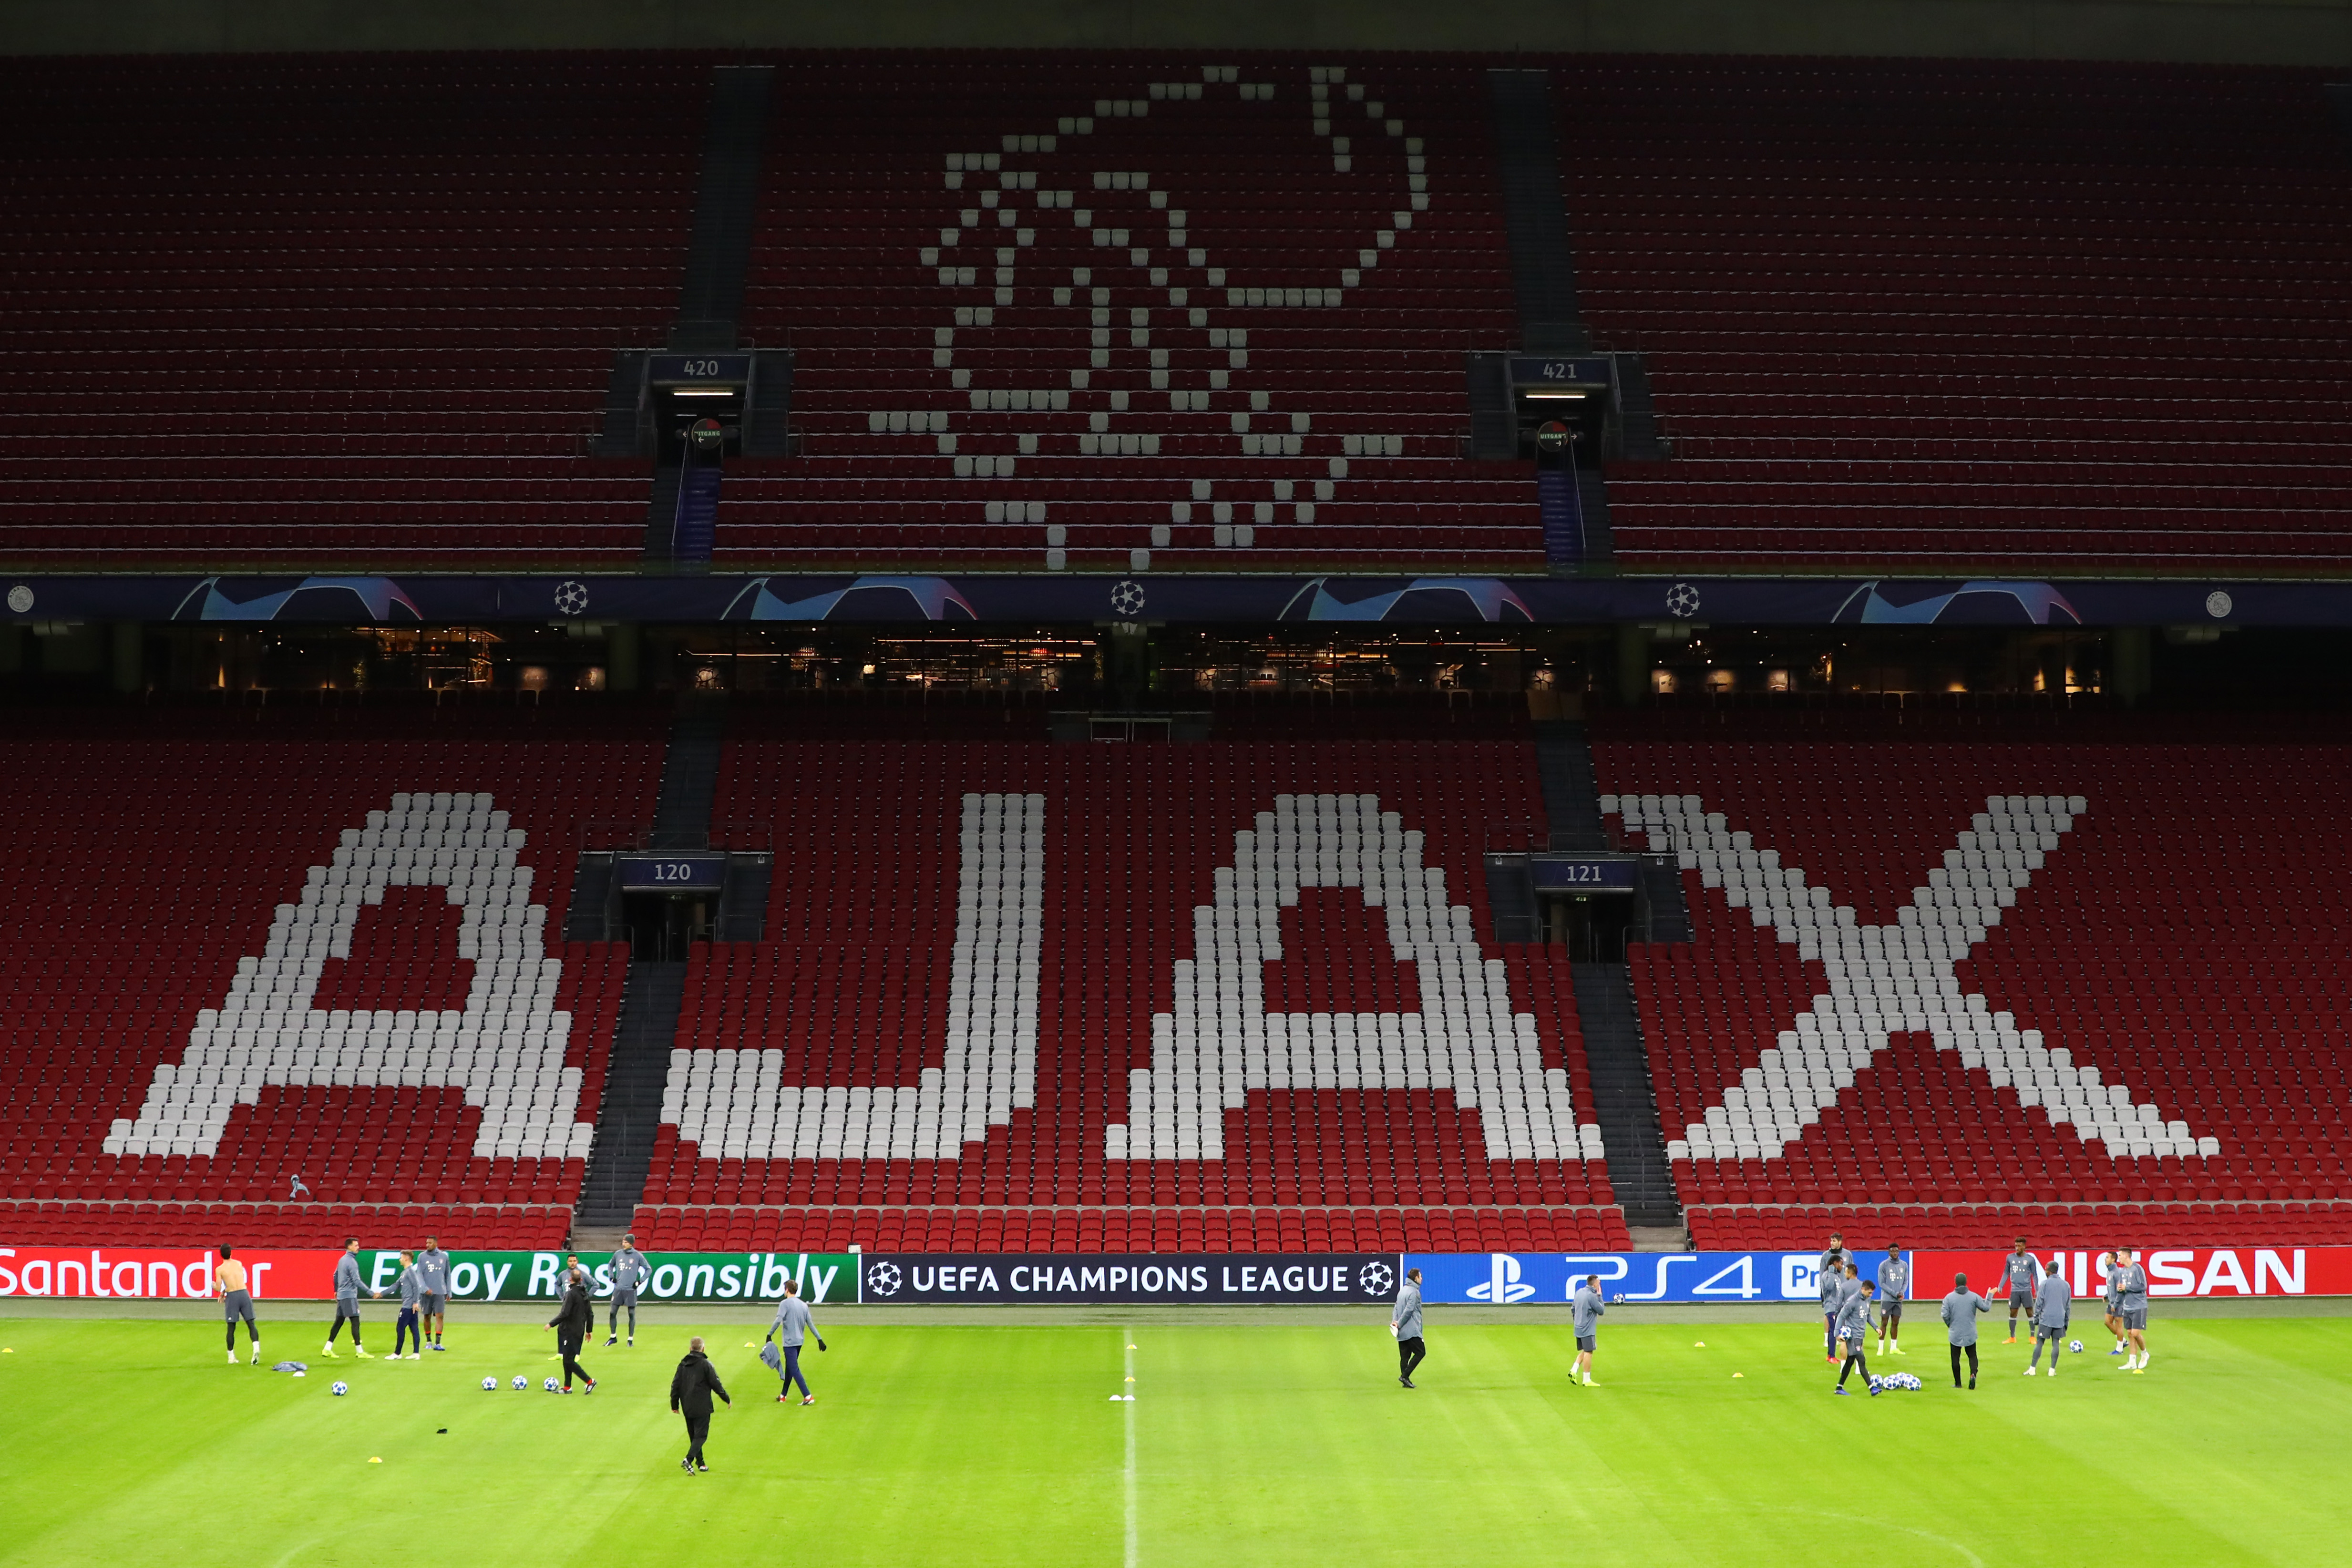 AMSTERDAM, NETHERLANDS - DECEMBER 11:  A general view inside the stadium during a training session ahead of their UEFA Champions League Group E match against Ajax at Johan Cruyff Arena on December 11, 2018 in Amsterdam, Netherlands.  (Photo by Dean Mouhtaropoulos/Getty Images)